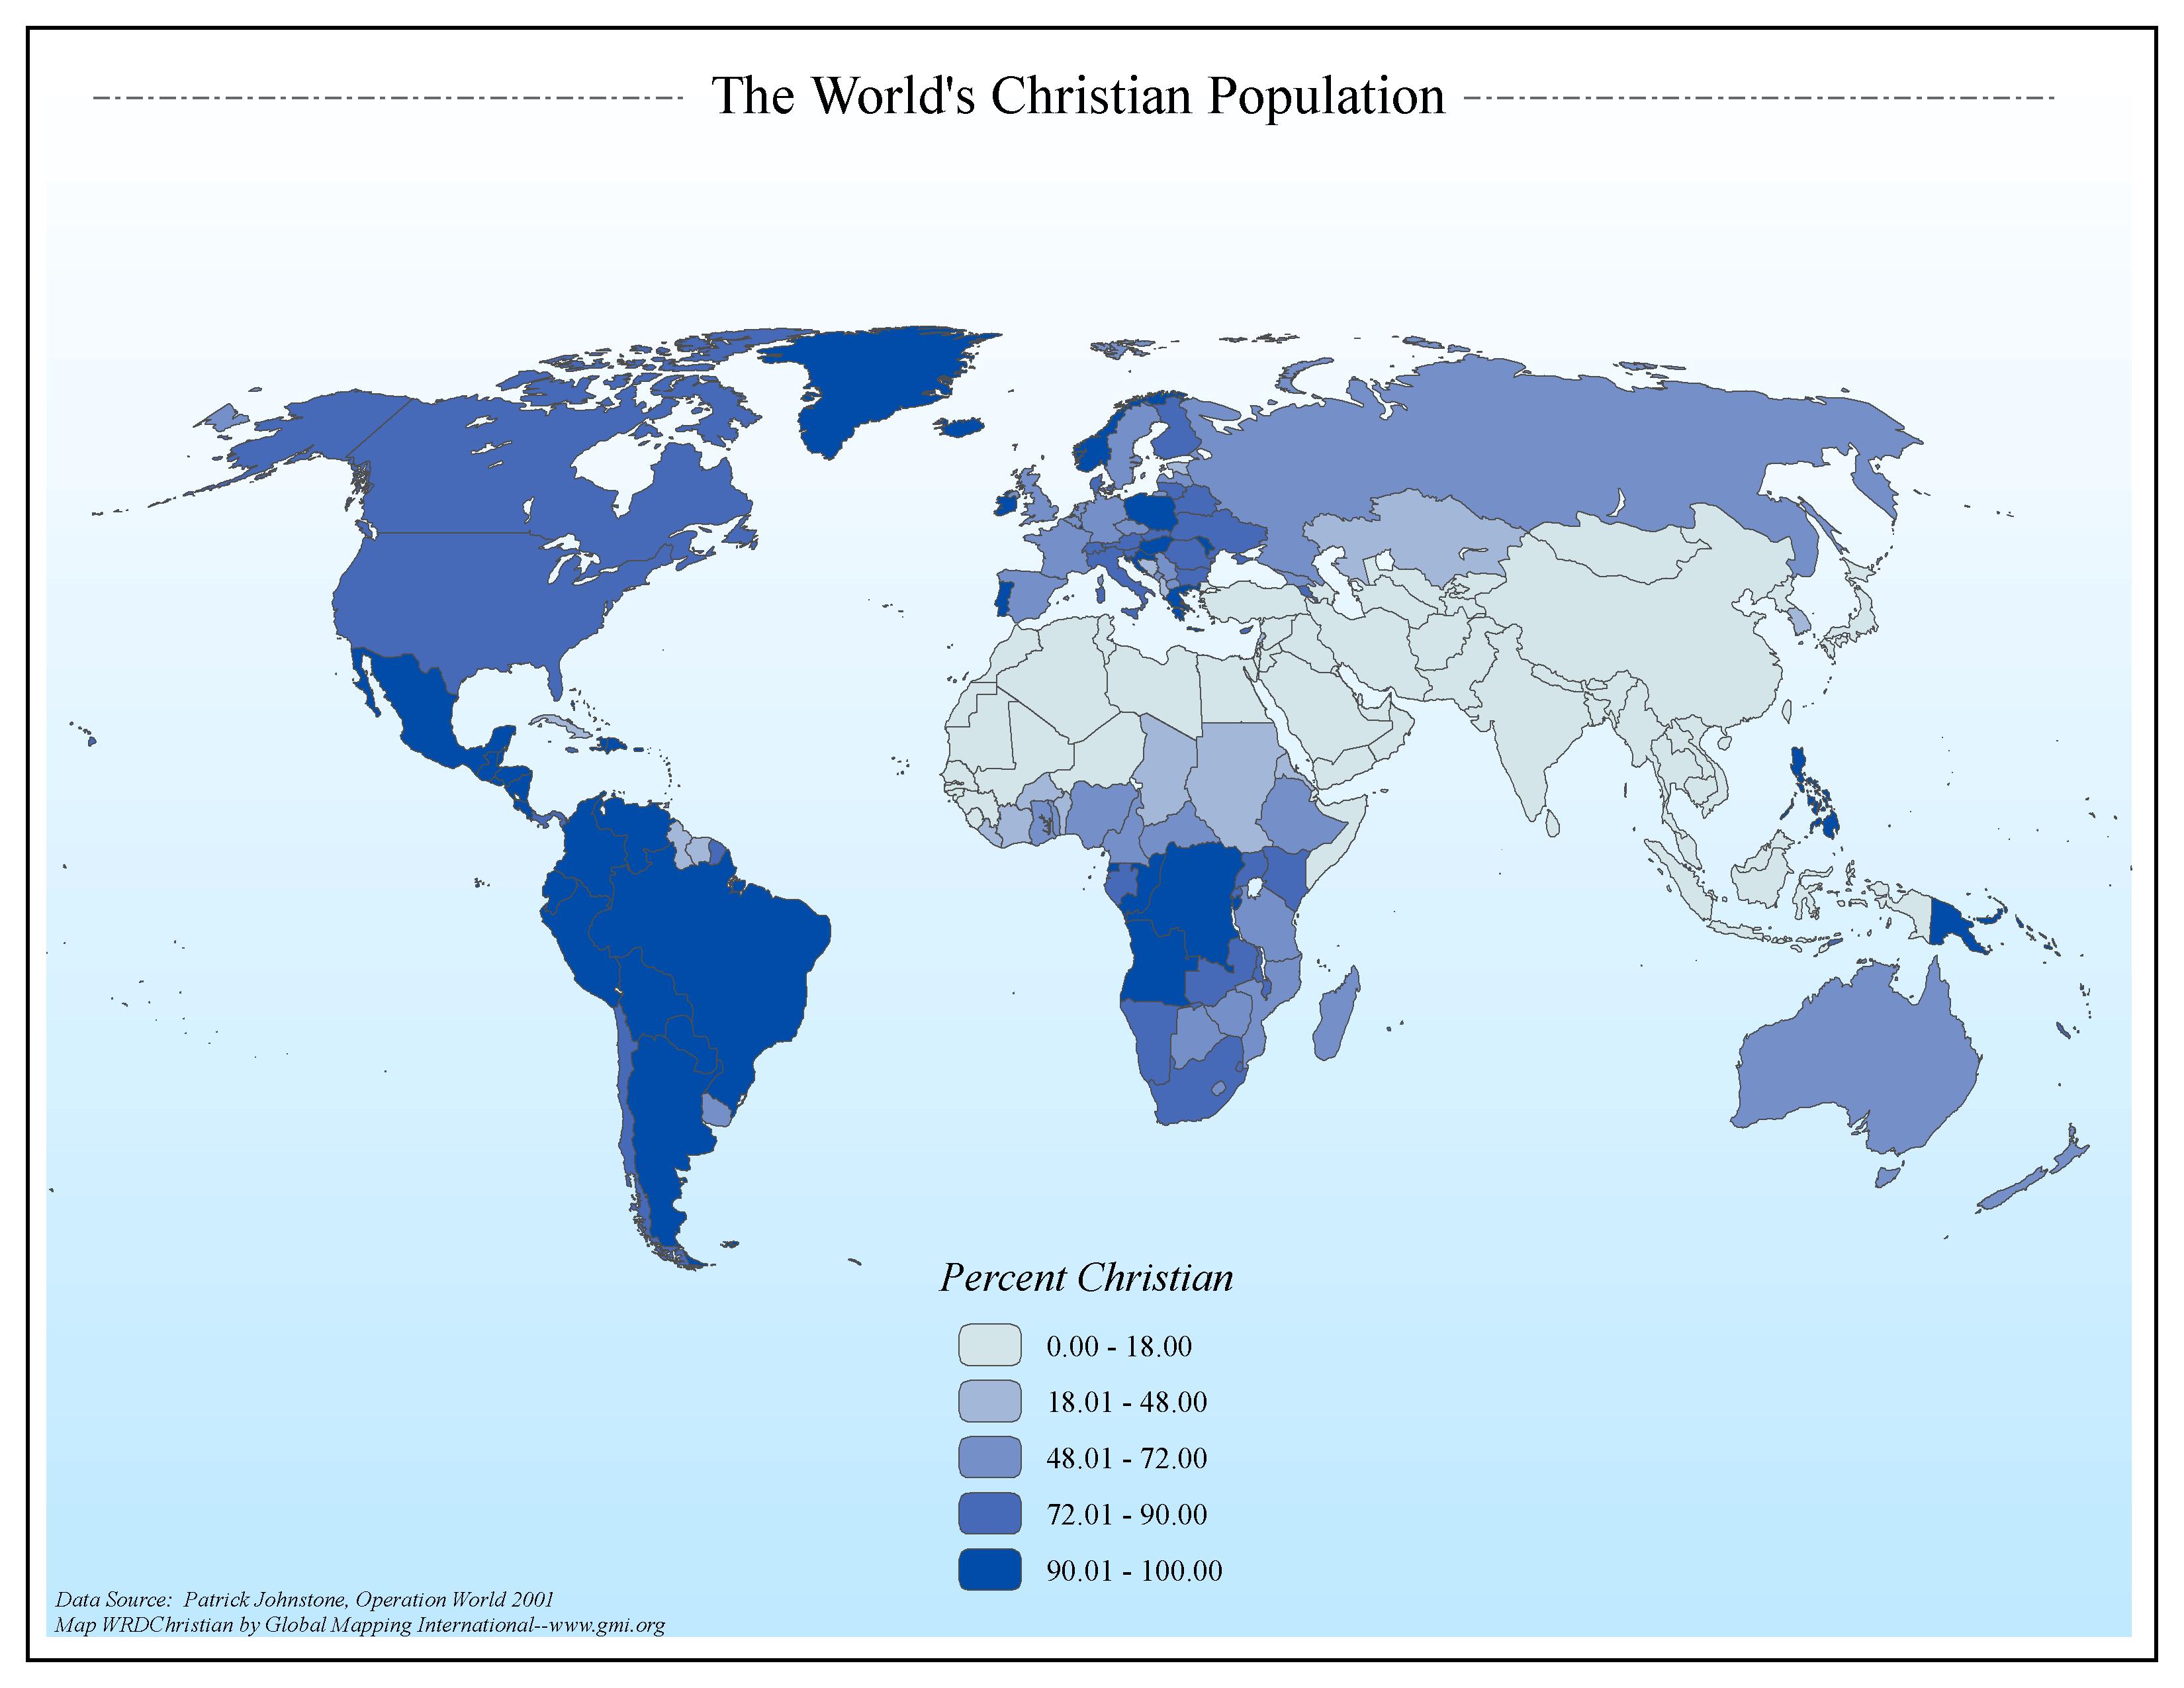 The Size and Distribution of the World's Christian Population